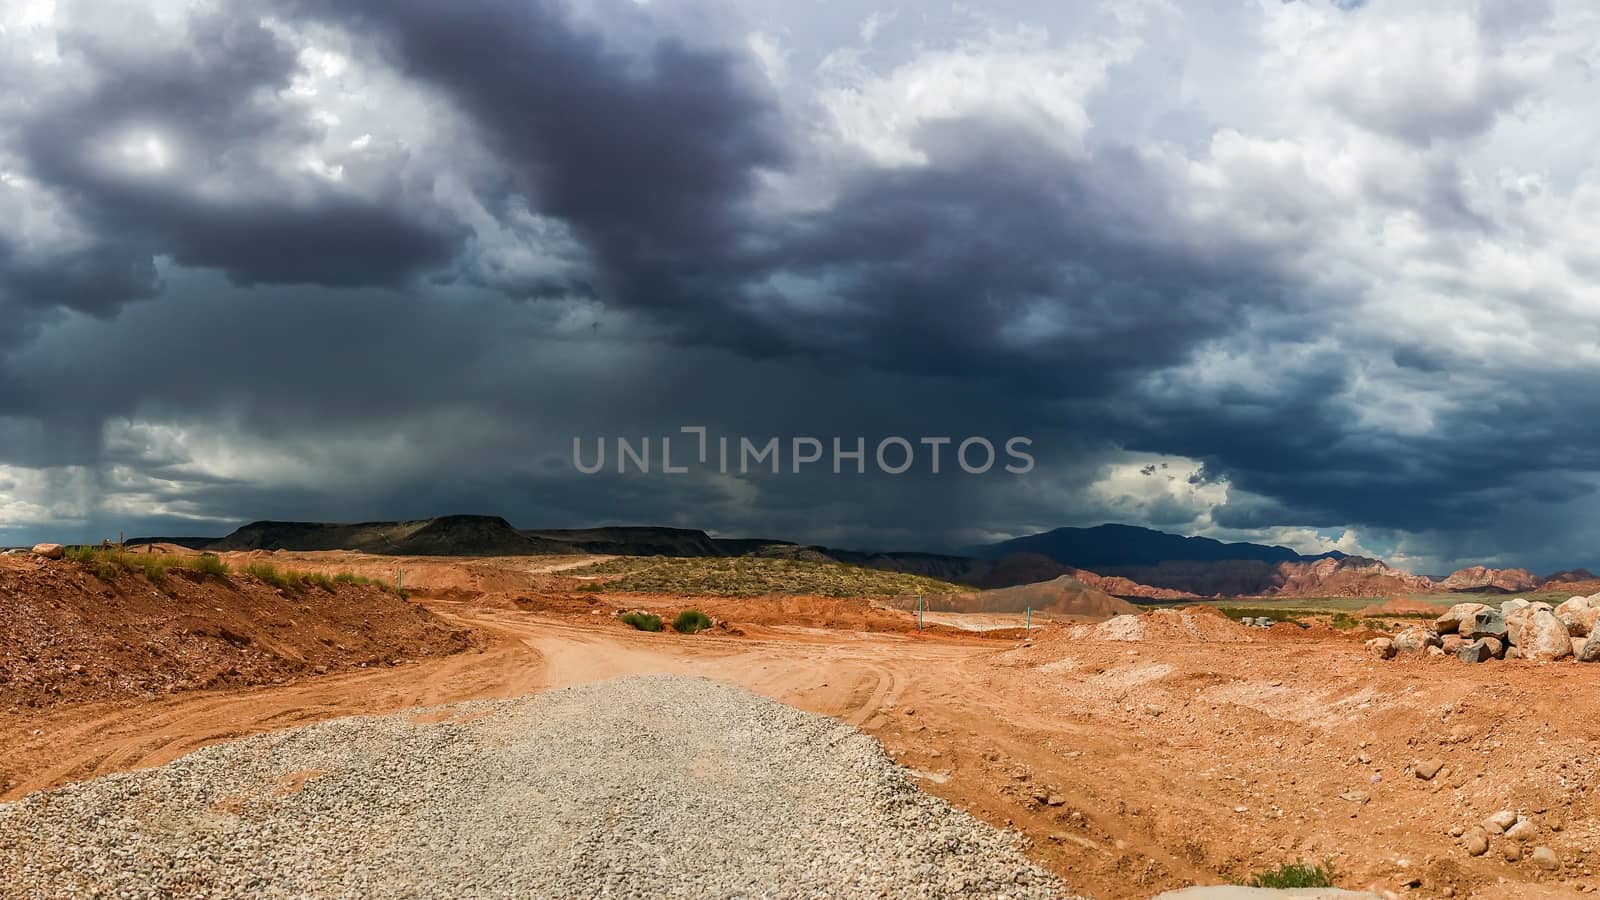 Ominous Stormy Sky and Cumulus Clouds with Rain in the Desert.